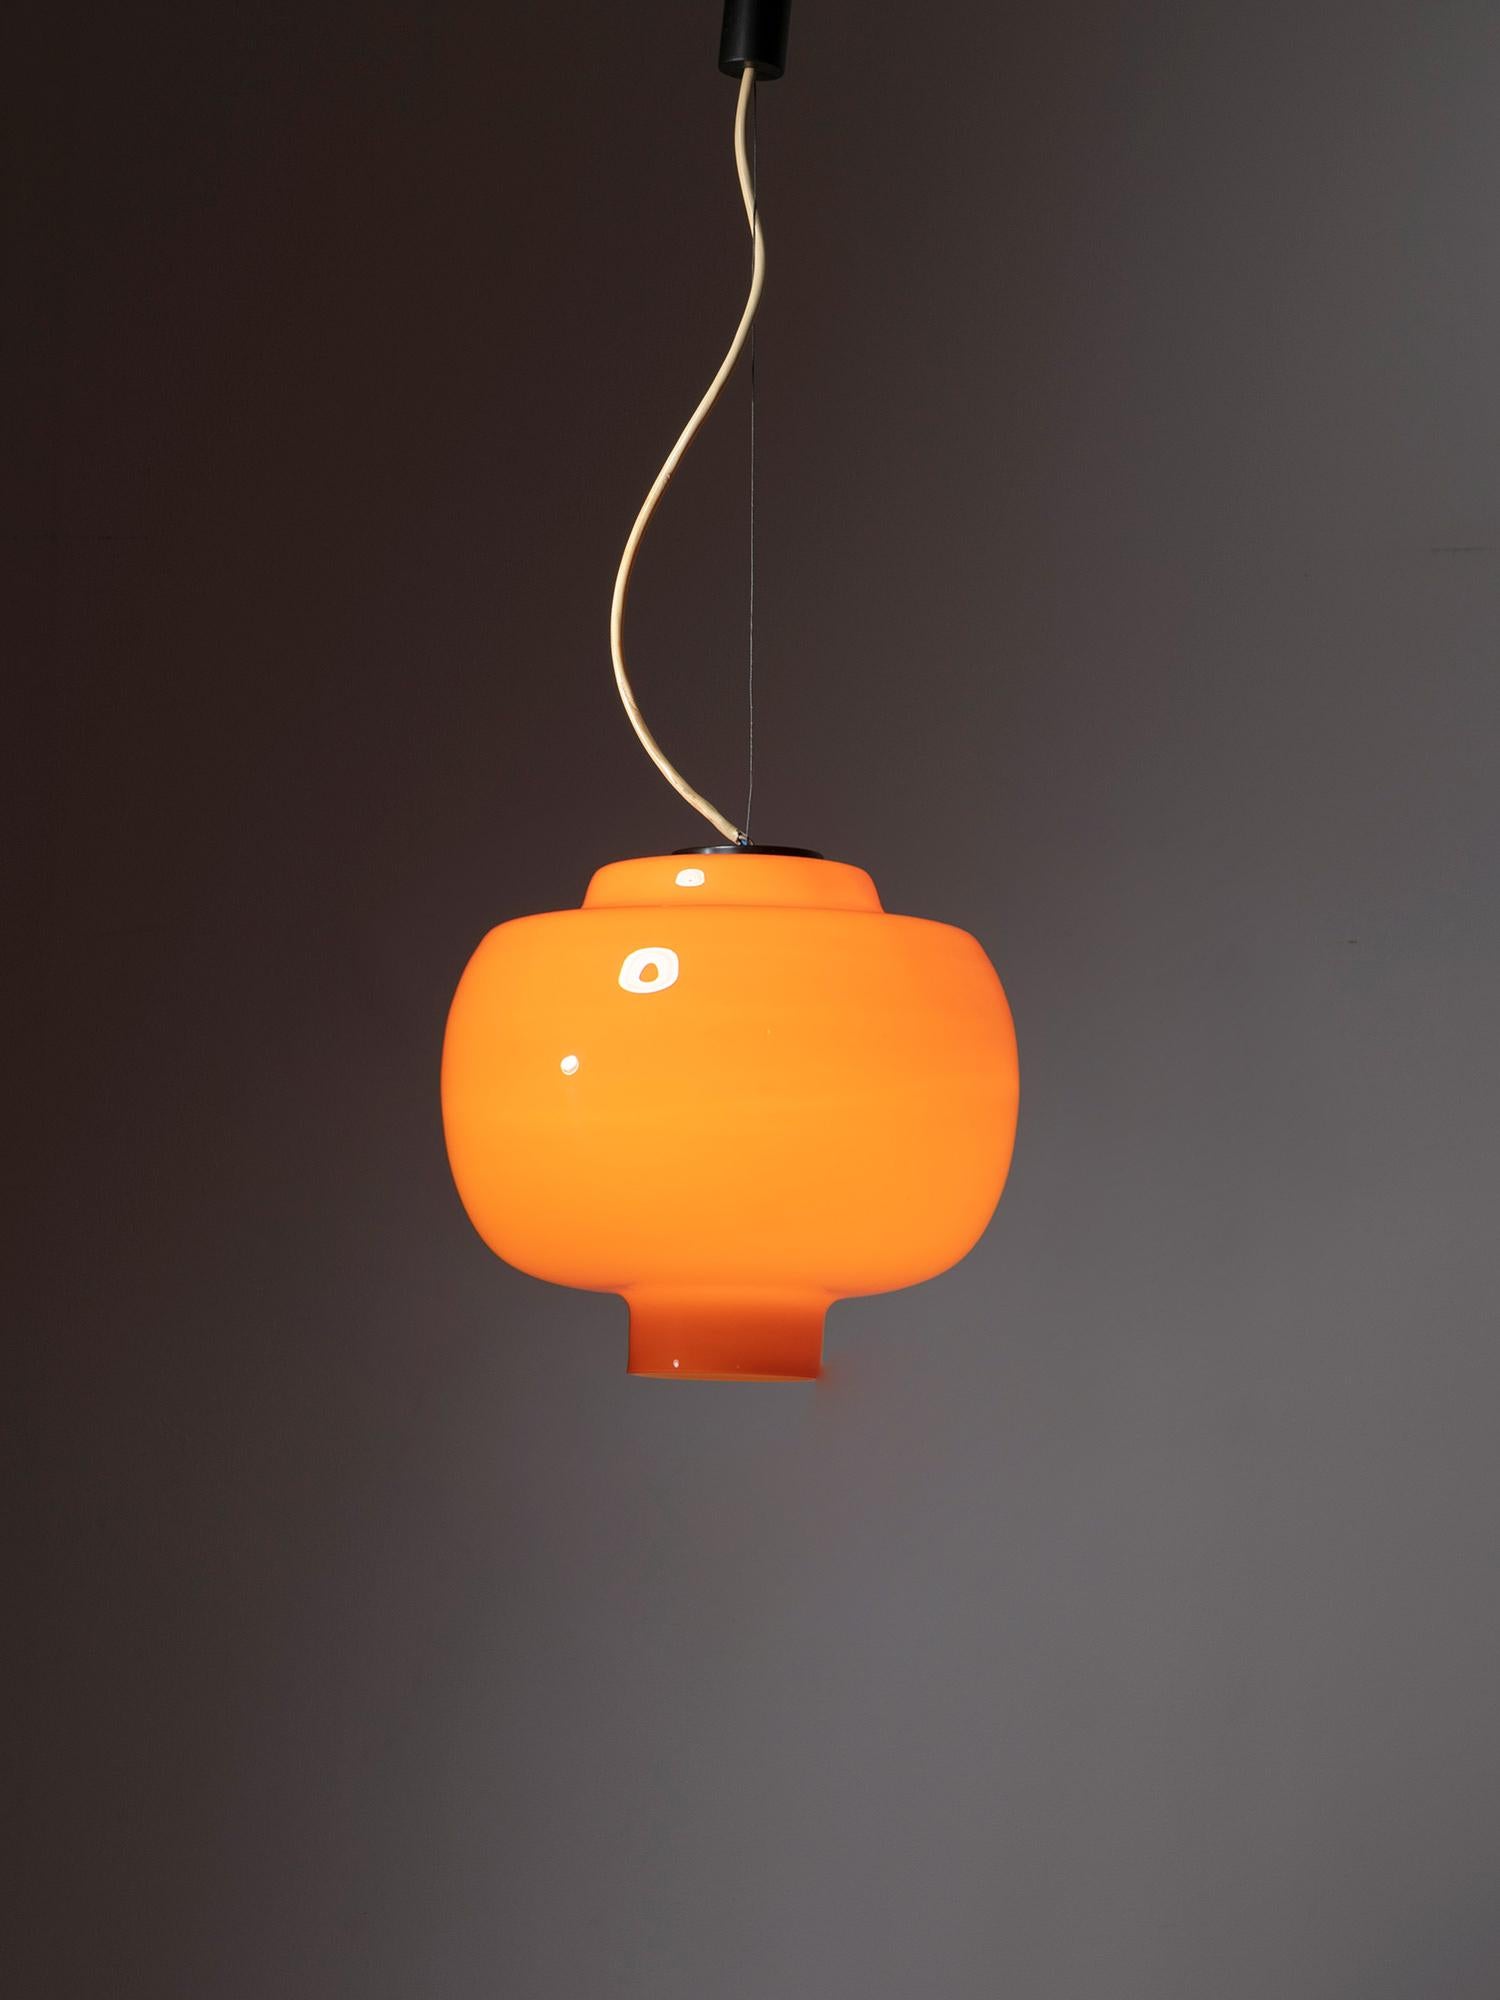 Murano glass pendant lamp manufactured by Vistosi.
Large incamiciato orange/white shade and brass details.